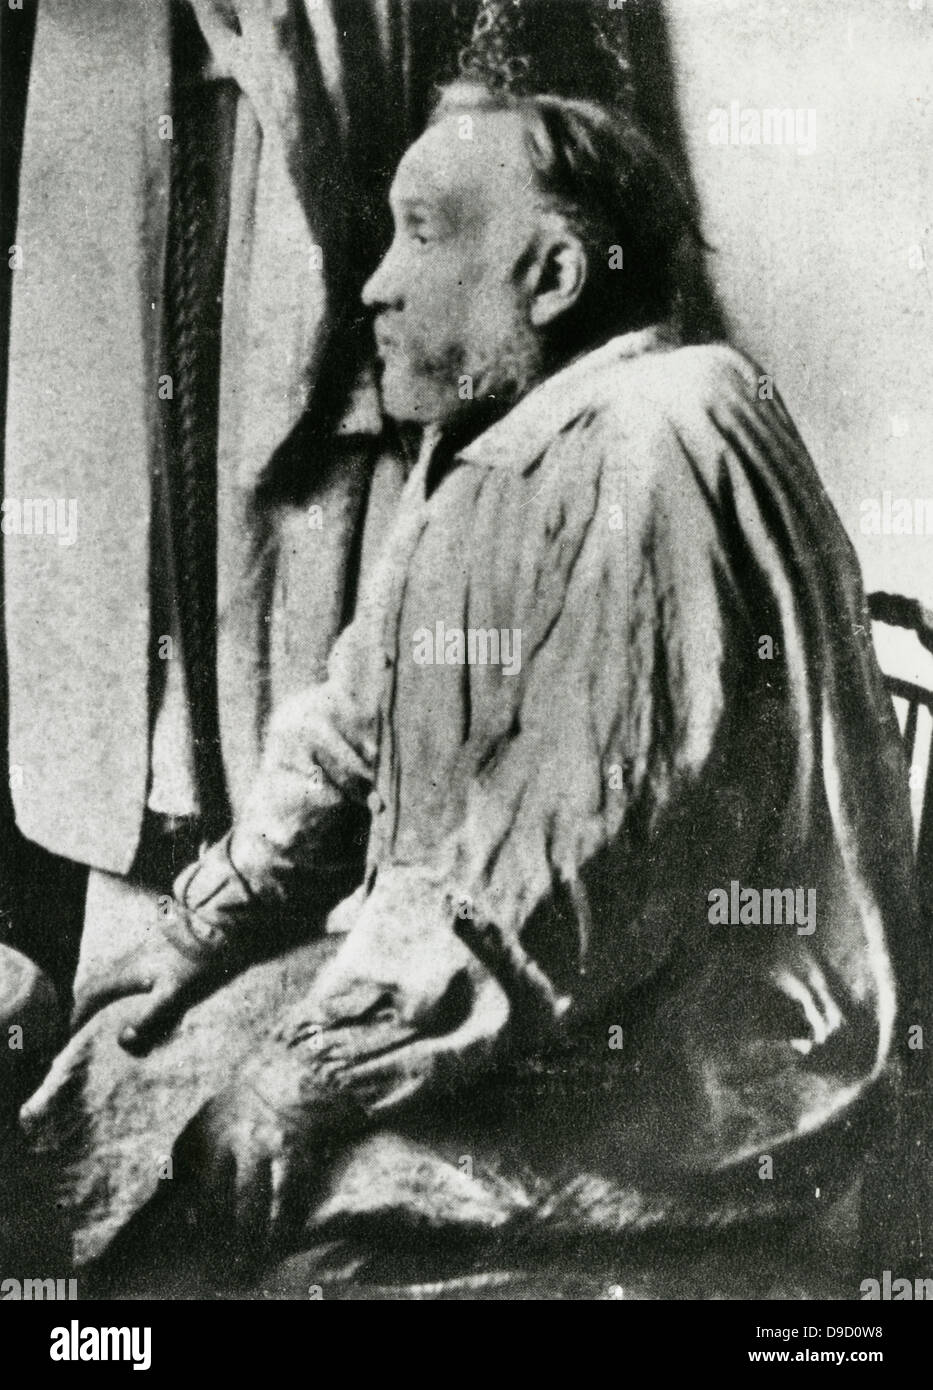 Edgar Degas (1834-1917) French painter, sculptor, and printmaker.  Considered to be one of the founders of Impressionism. Degas, seated, in his painting smock. Stock Photo